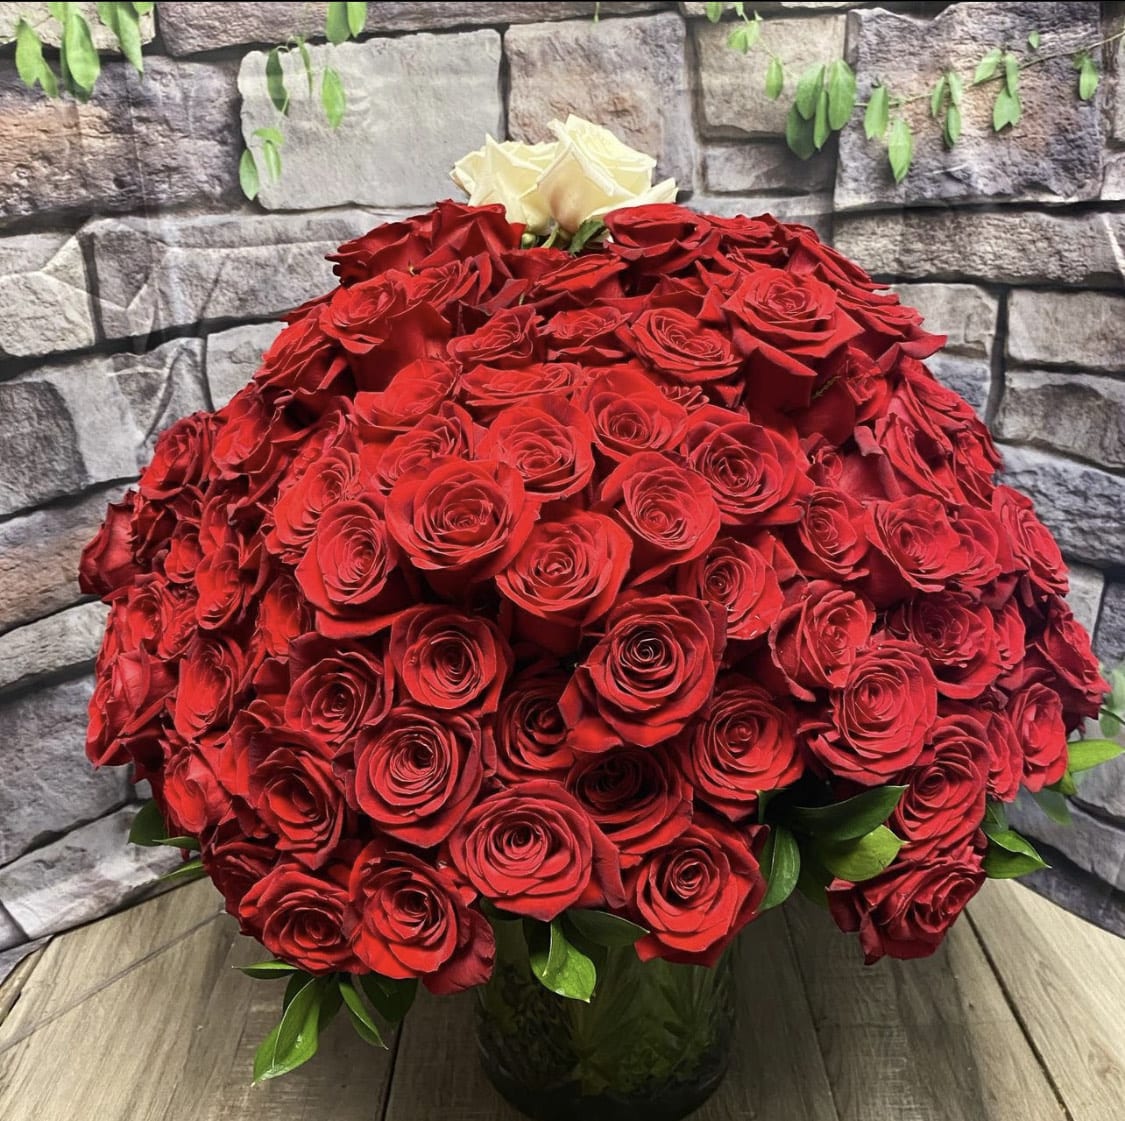 Cosmic Love - Attention: Please give a 3-5 days notice when ordering this arrangement, or call to verify we can make delivery same day. This gorgeous red rose arrangement is the perfect way to let your partner in life know, you love them and your love comes from out of this world. All the stars are aligned and you have found you cosmic love &lt;3 Arrangement Details: 216 Red roses and 2 white roses at the top. (Signifies the two people in the relationship) 